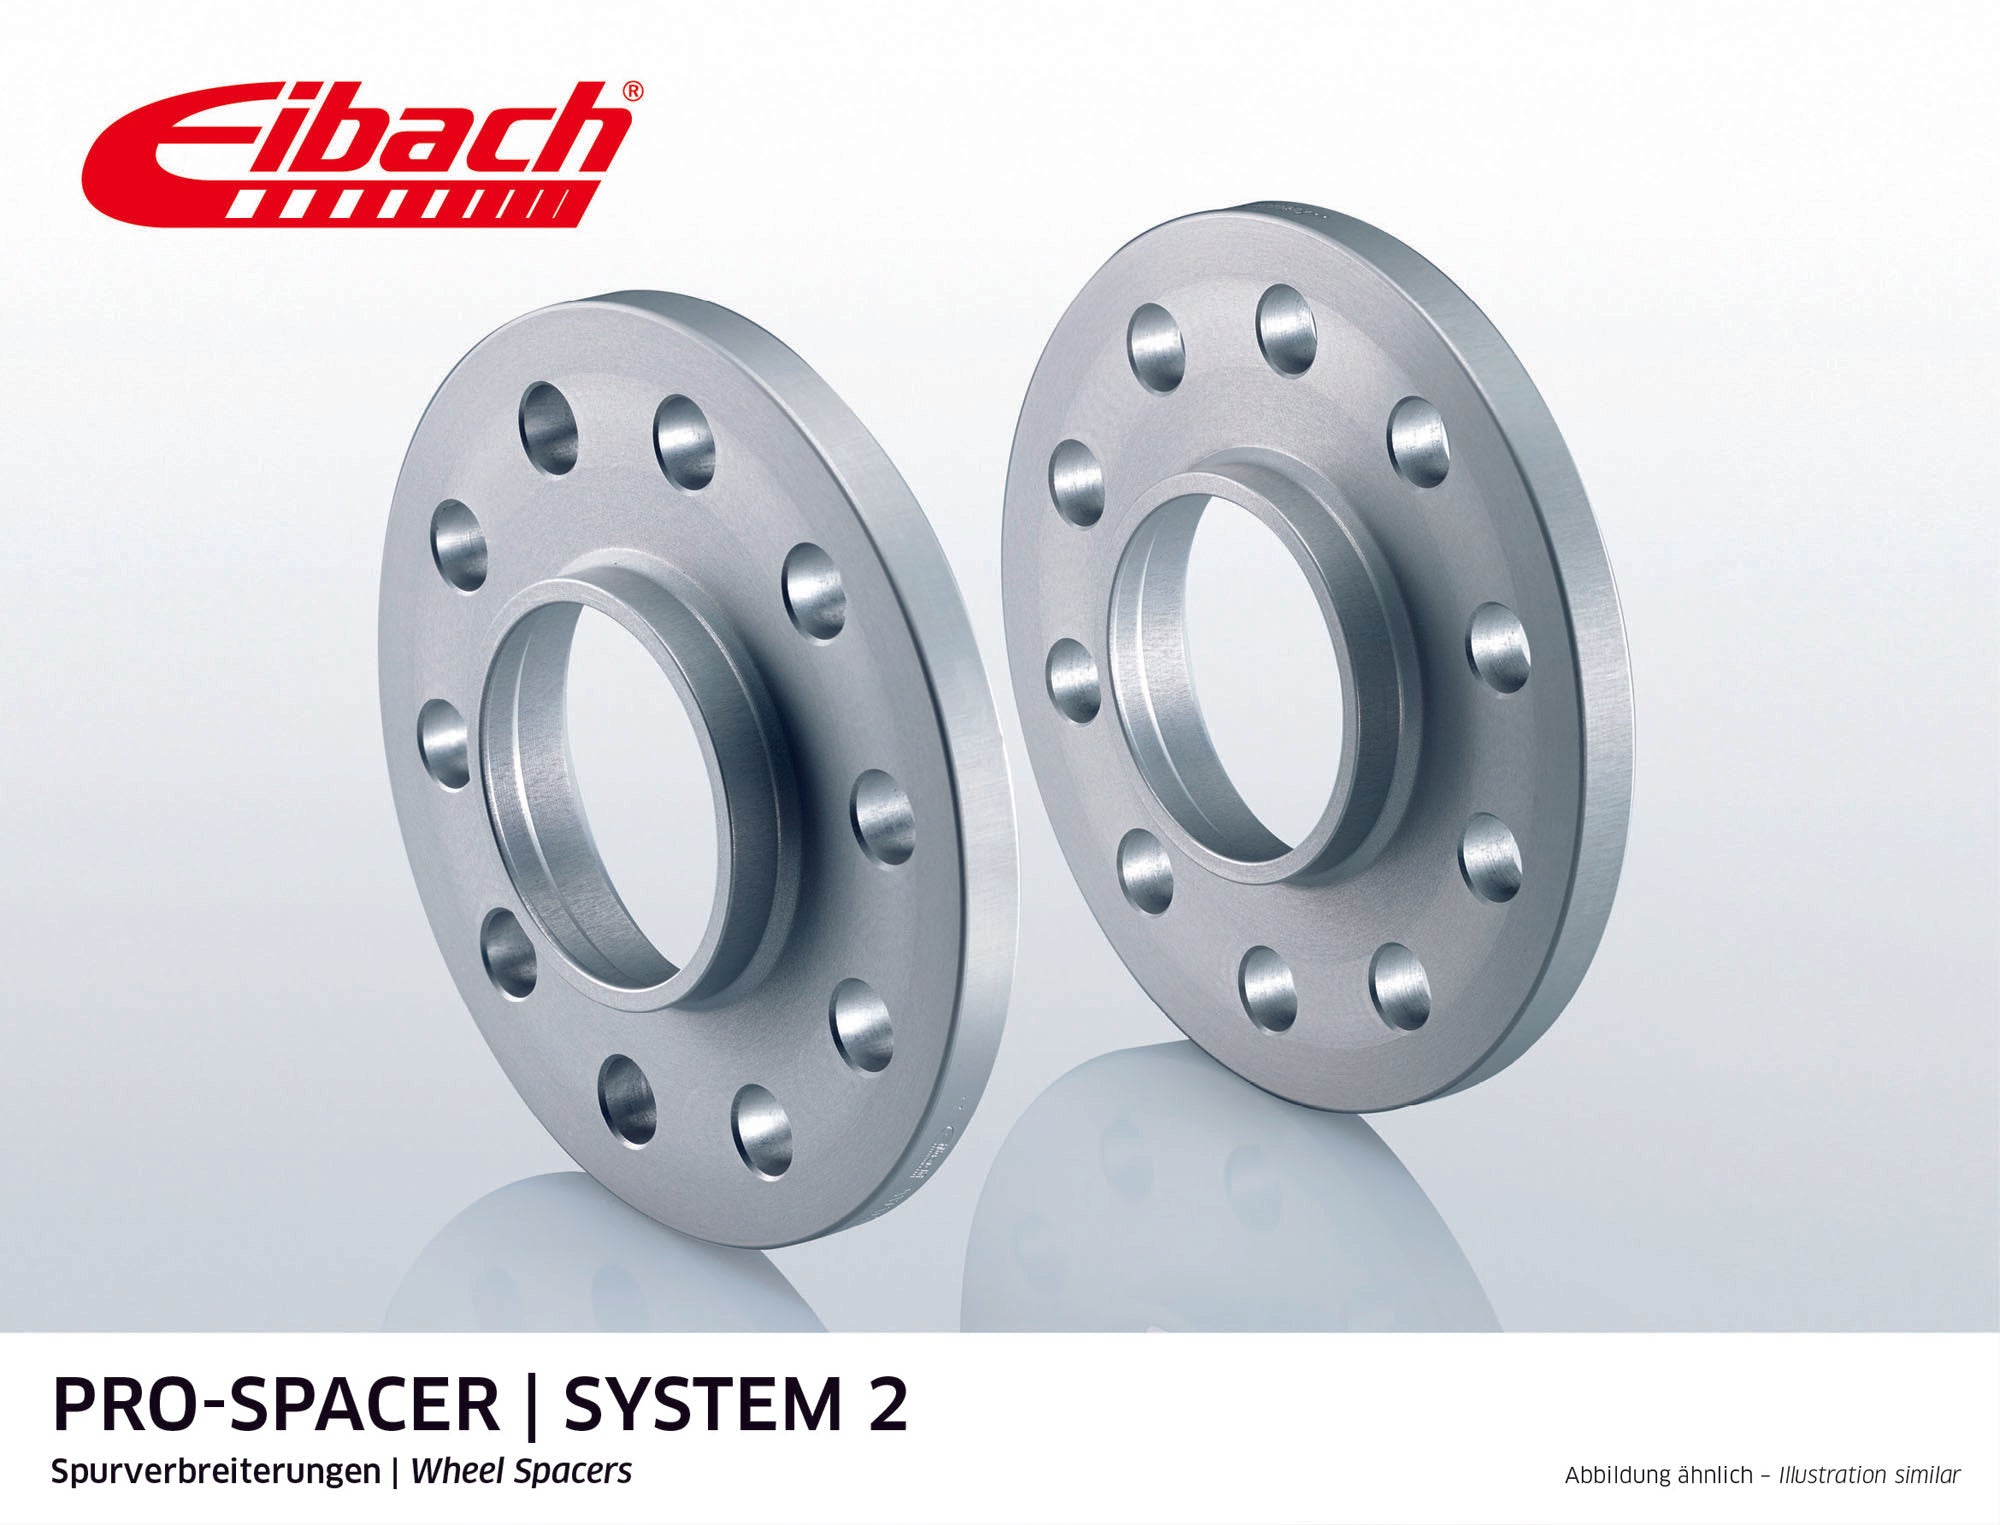 Eibach 23mm Pro-Spacer - Silver Anodized Wheel Spacer 911 1997-05 #S90-2-23-001